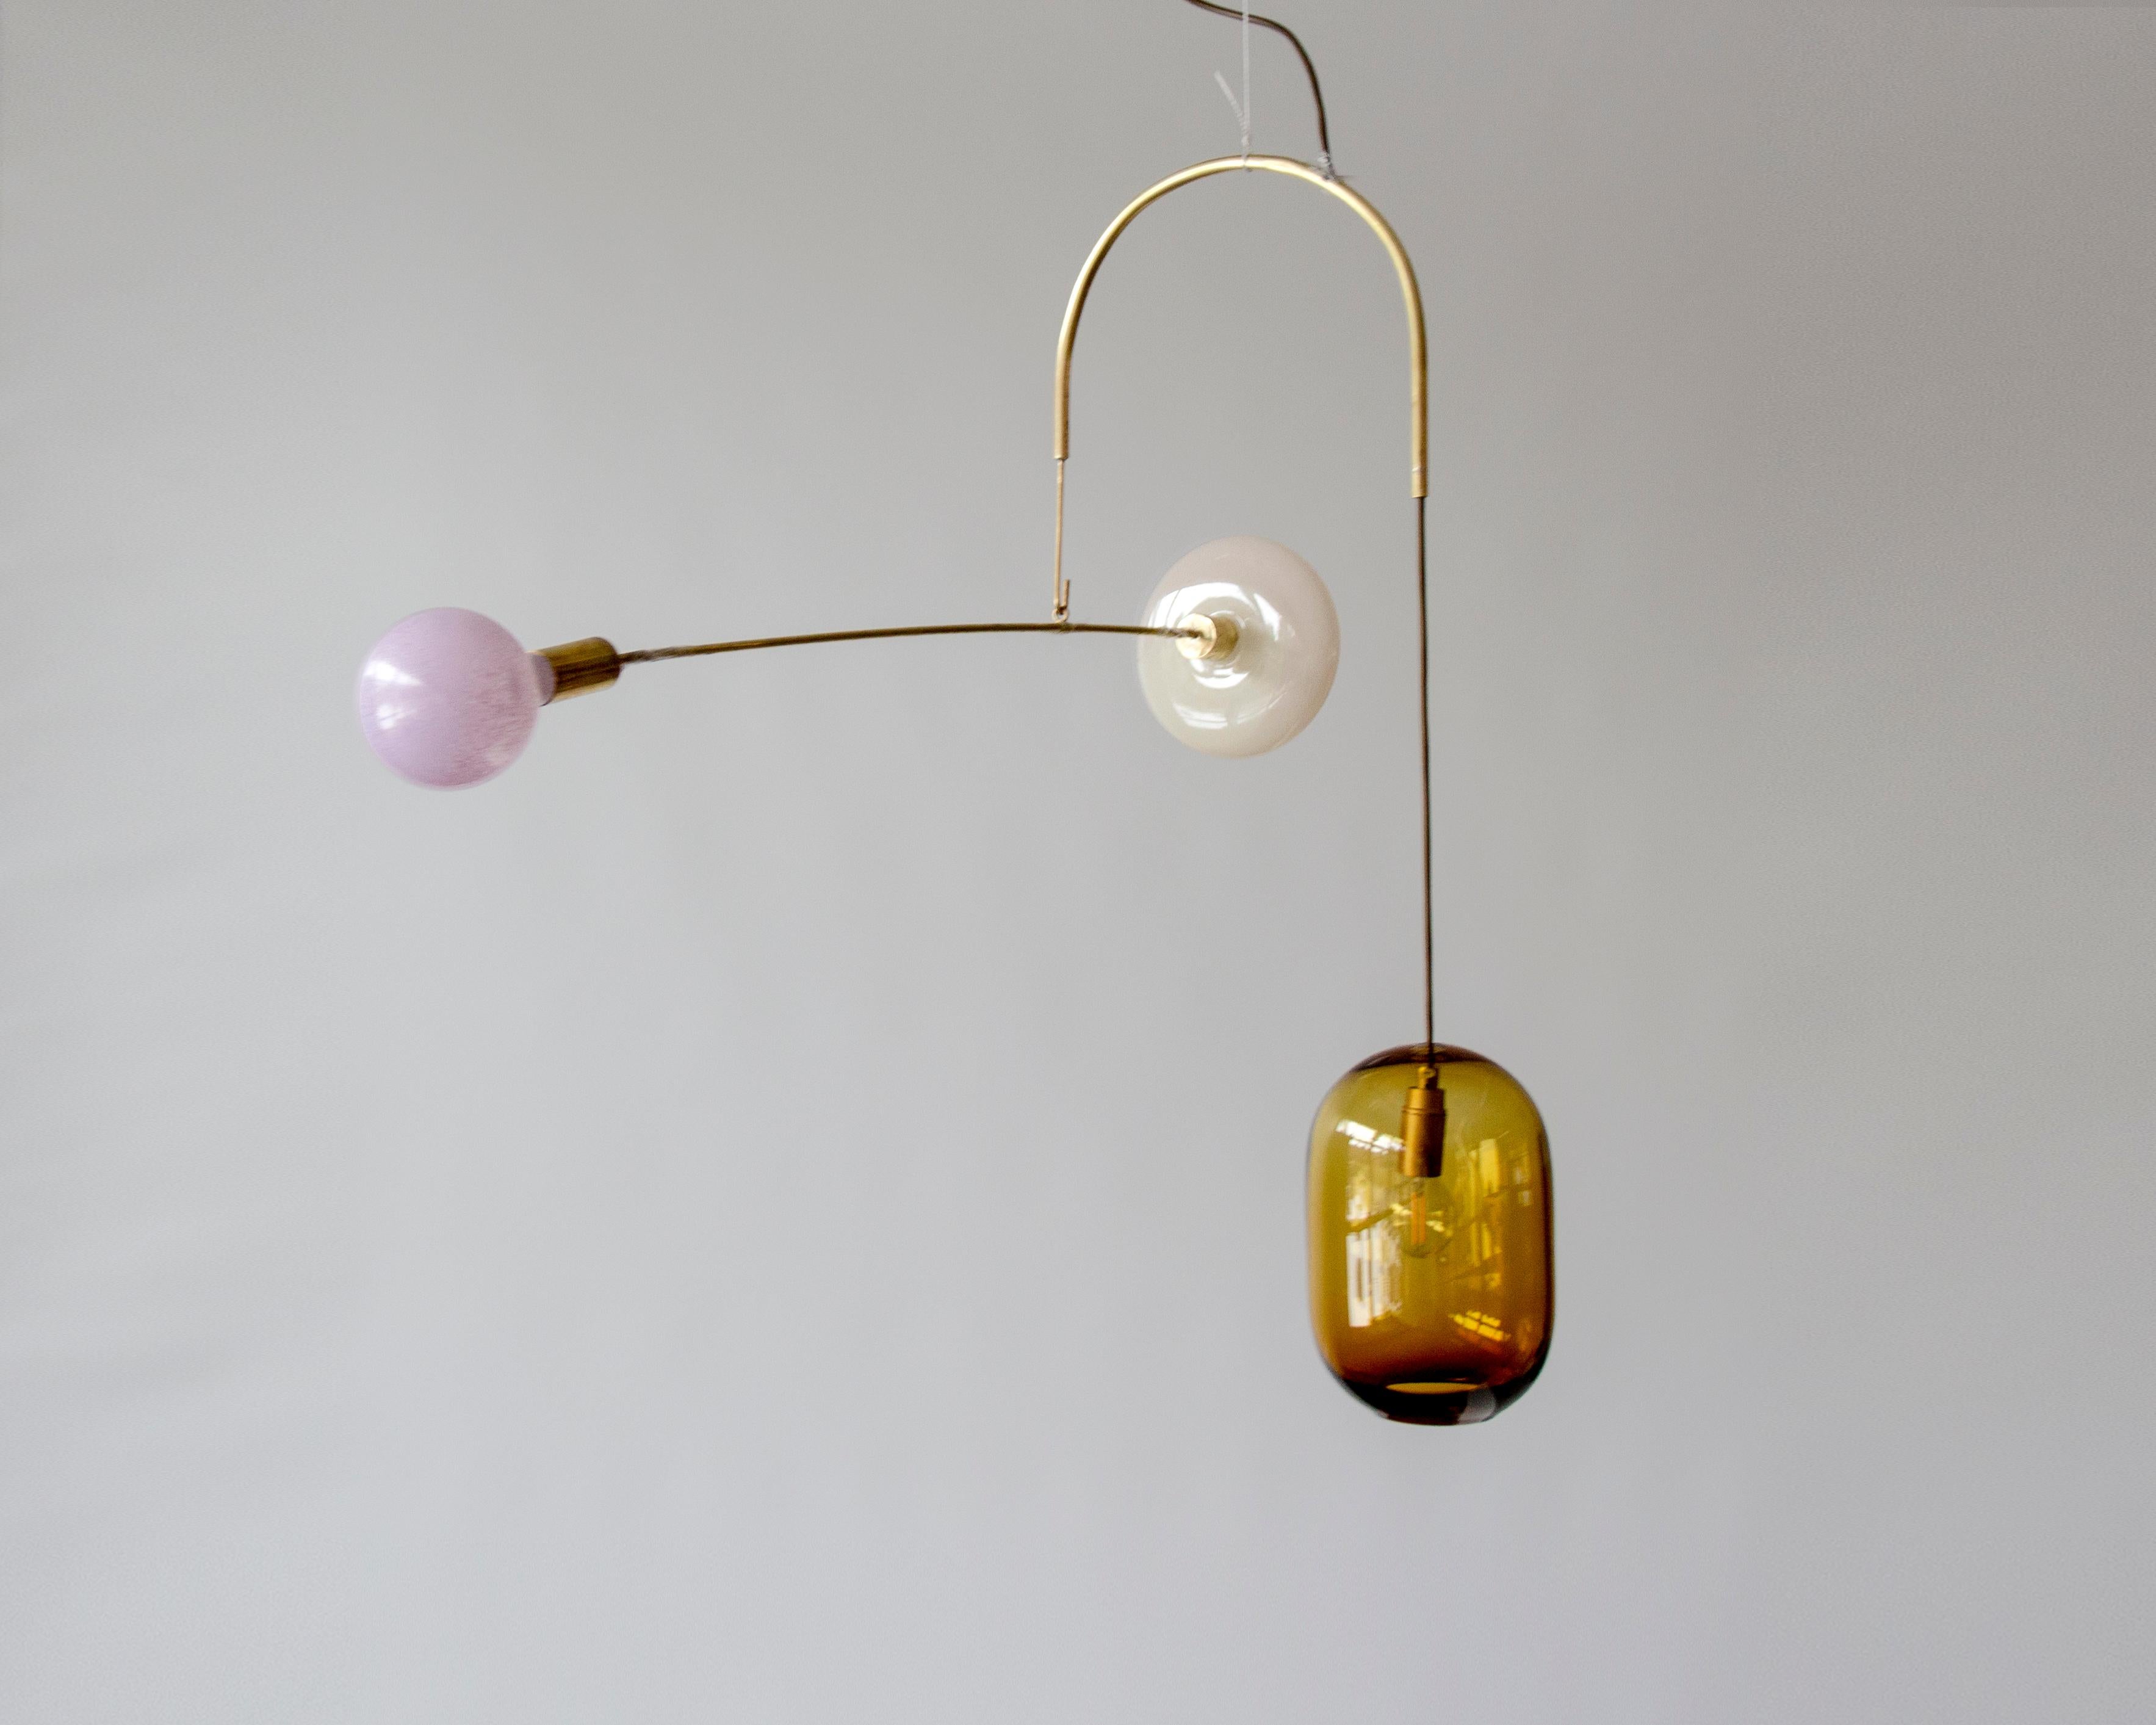 Sculptural light No. 68 by Milla Vaahtera
Dimensions: W 30 x L 85 x H 60 cm
Materials: Glass, Brass

In 2020 Milla Vaahtera started a series of unique sculptural lights made out of brass and hand blown glass.
